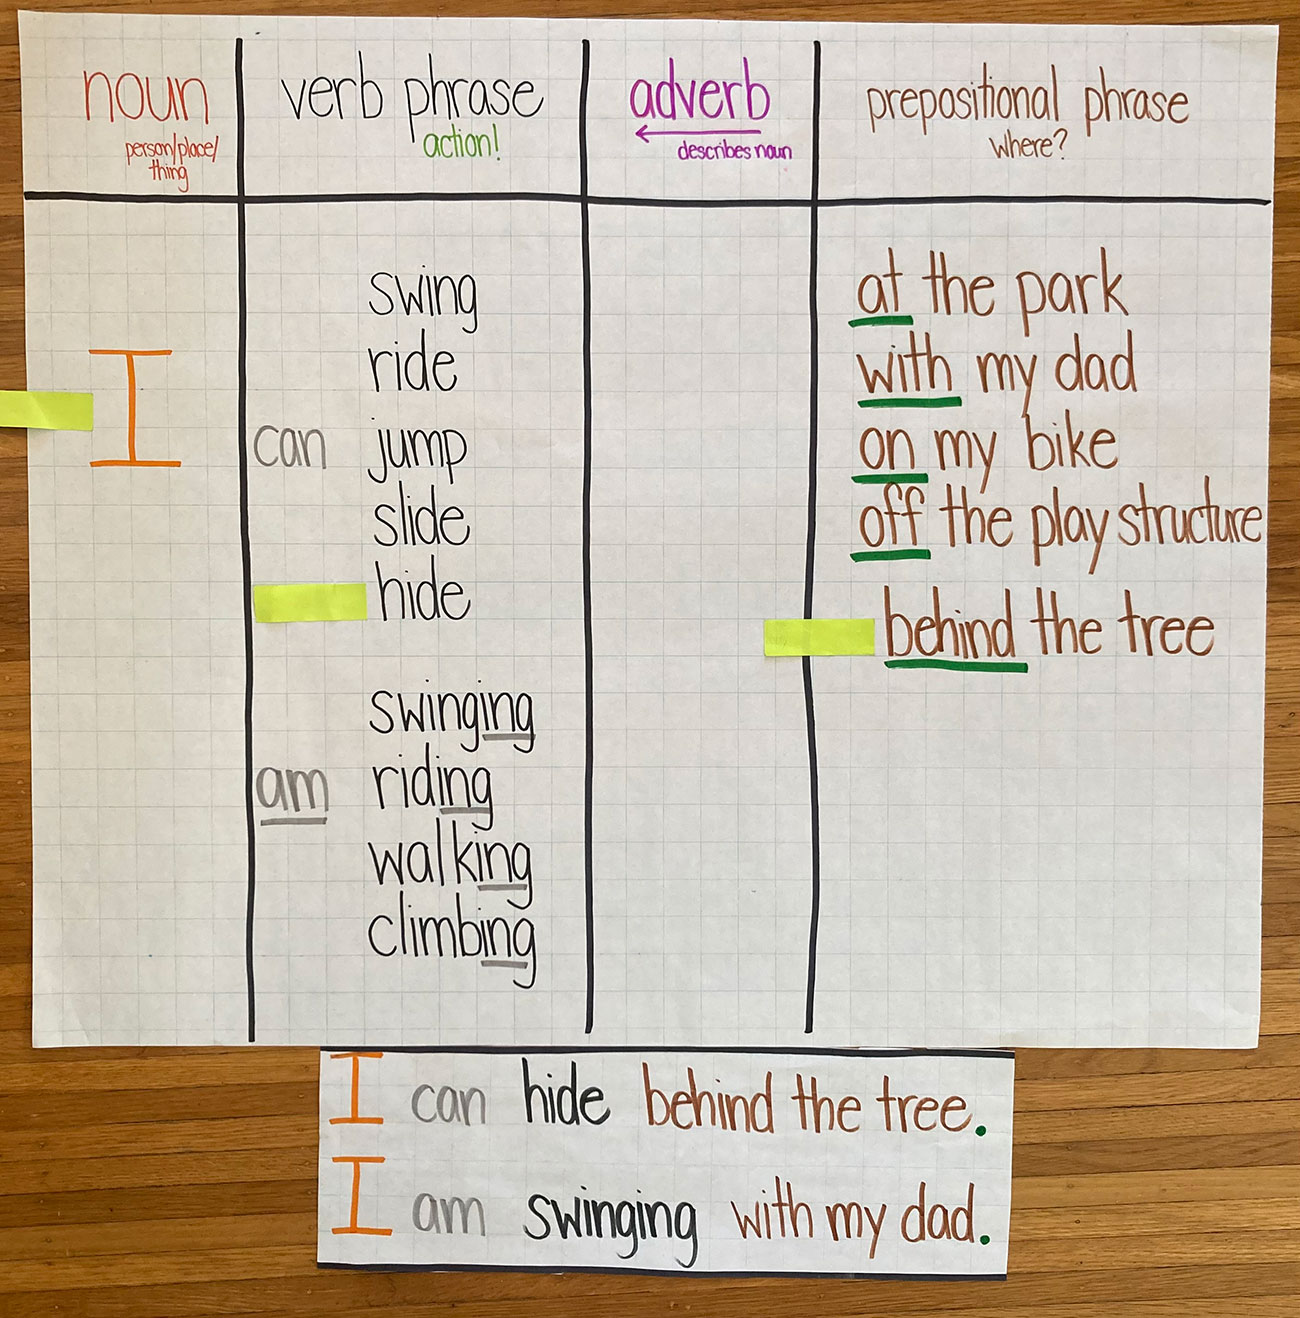 Example of a GLAD sentence patterning chart